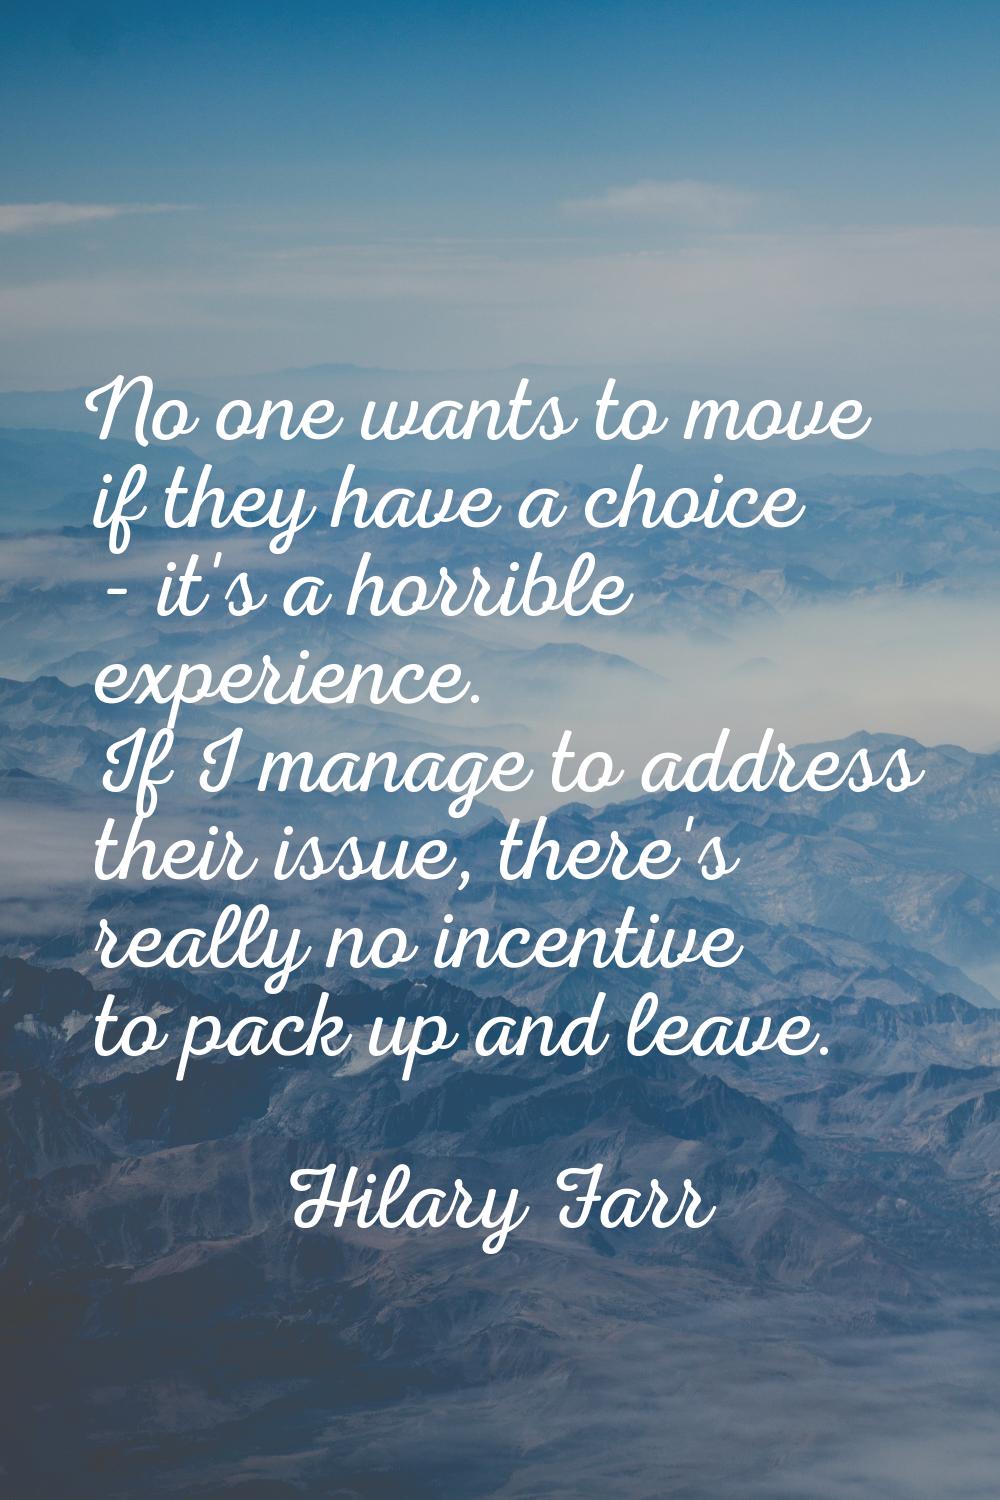 No one wants to move if they have a choice - it's a horrible experience. If I manage to address the